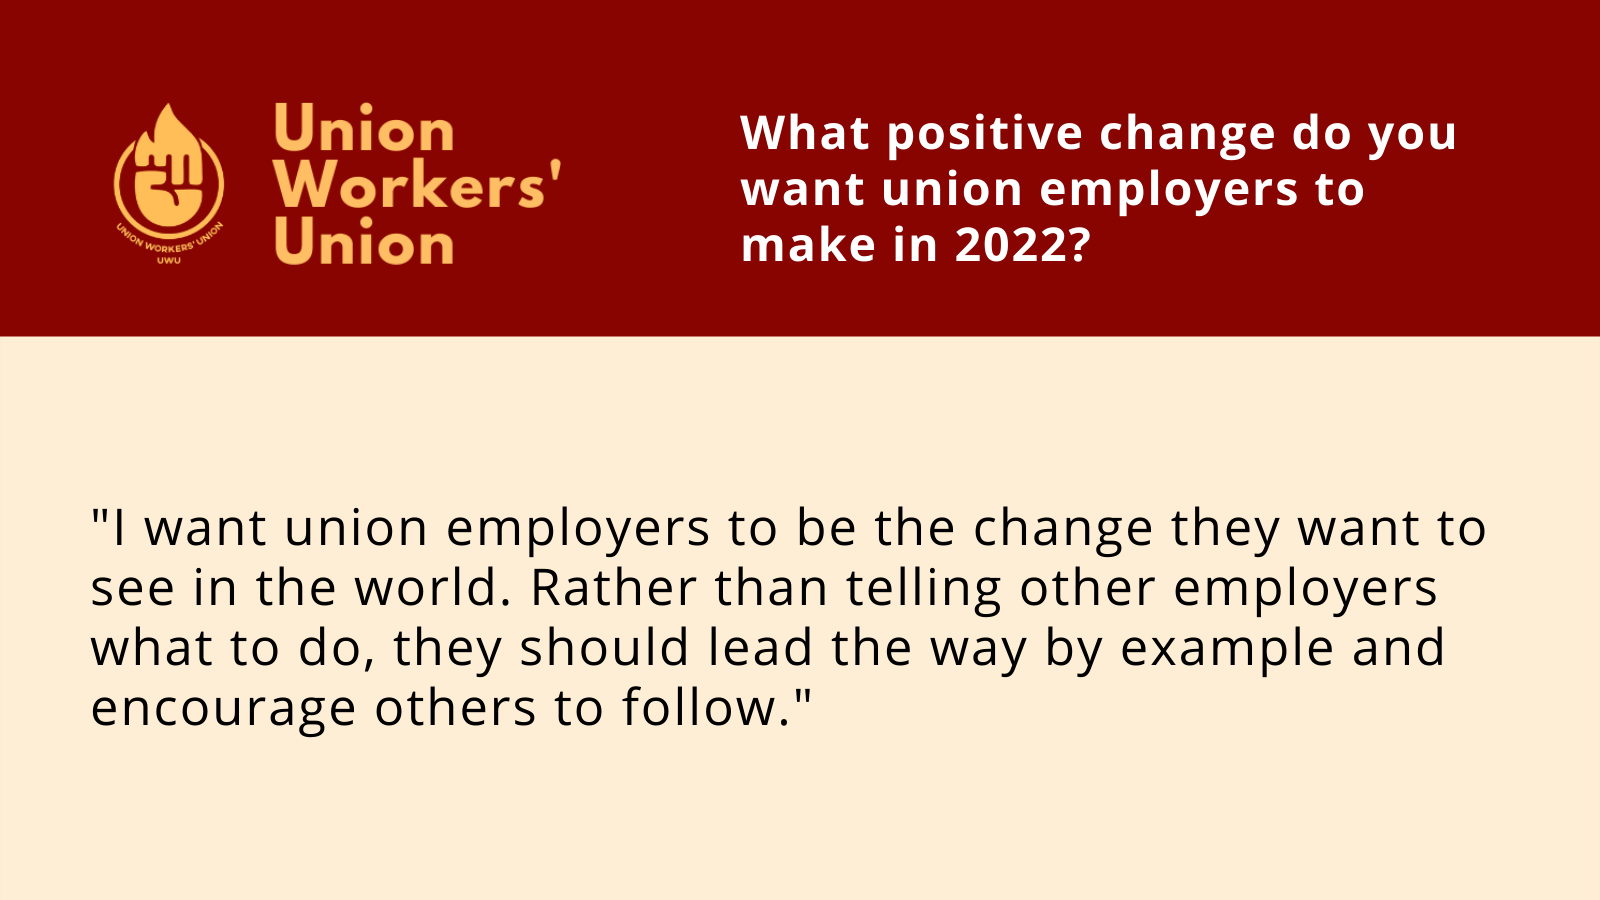 UWU logo and question - what positive changes do you want union employers to make in 2022? Member response: I want union employers to be the change they want to see in the world. Rather than telling other employers what to do, they should lead the way by example and encourage others to follow.